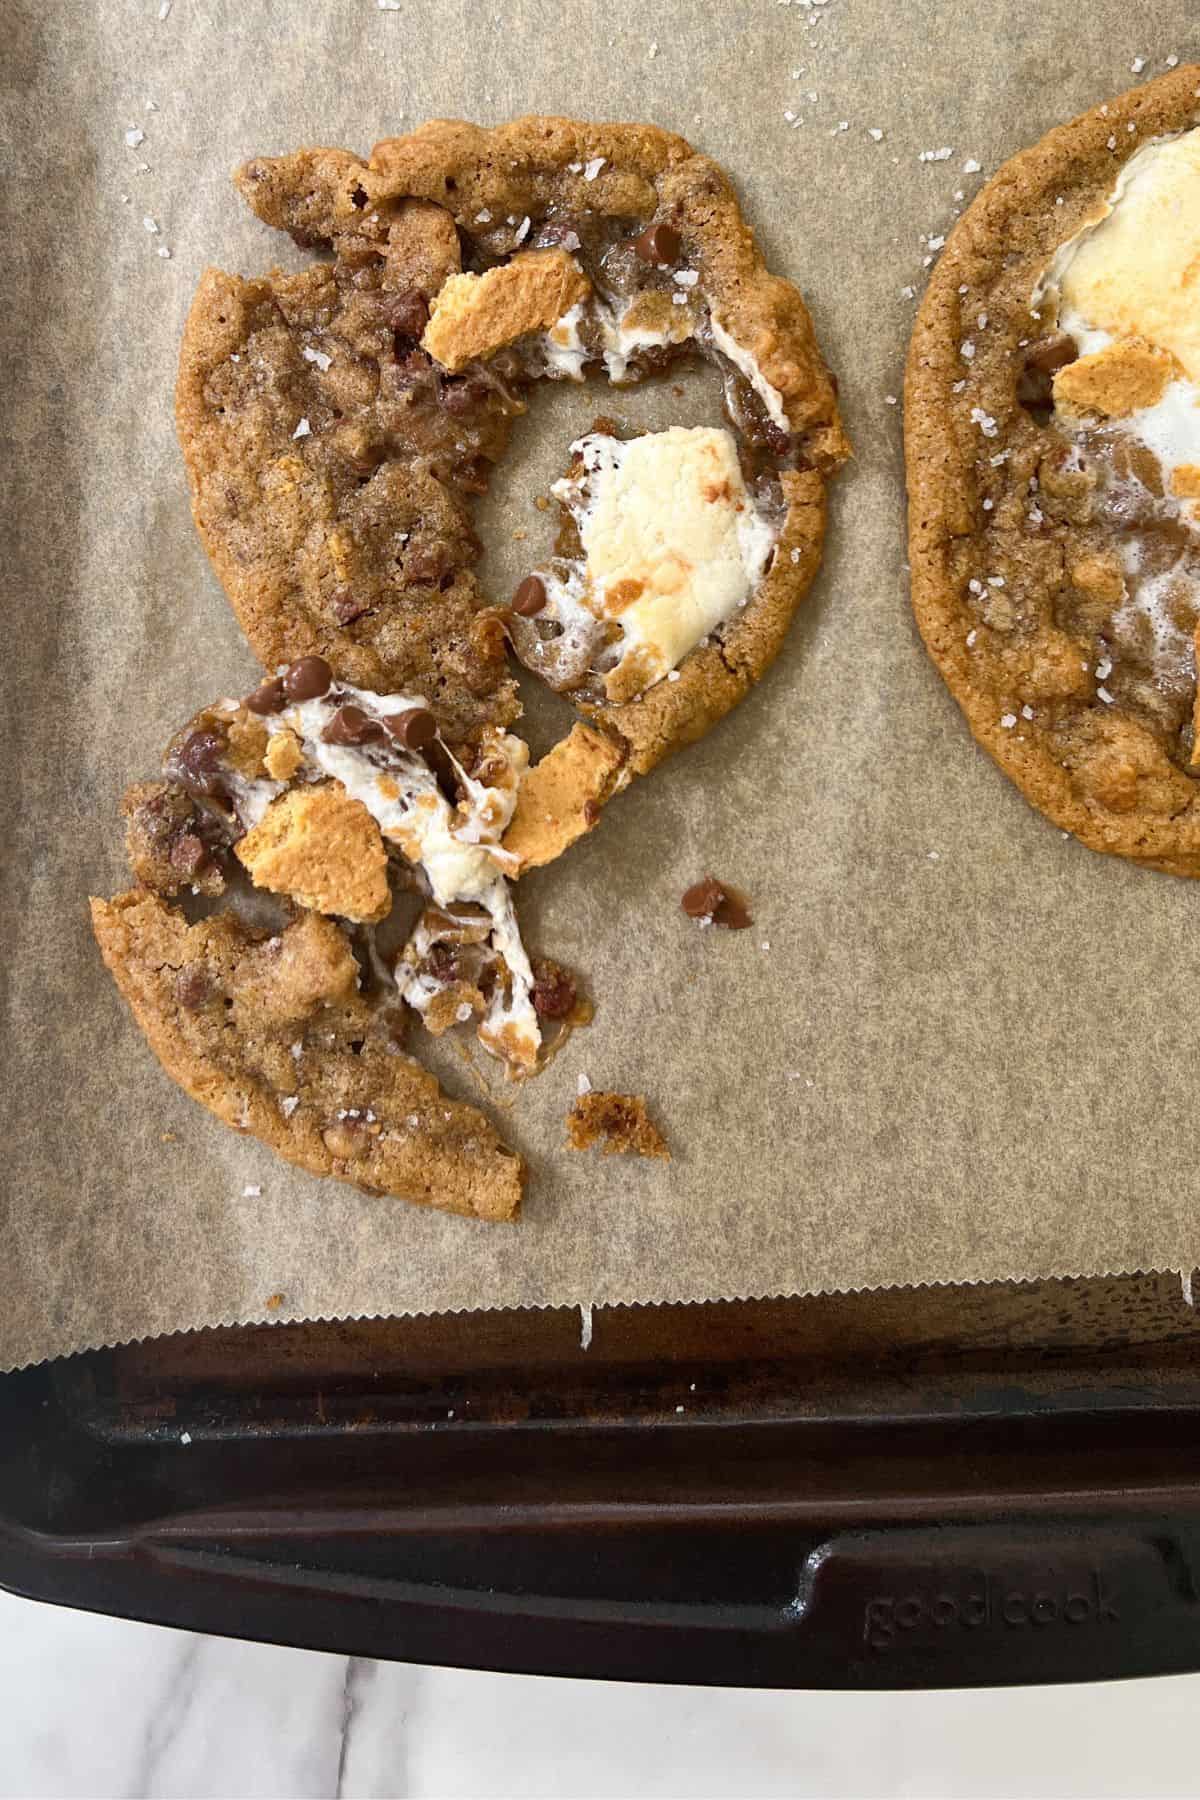 Broken up Chocolate Chip Marshmallow Cookies on a baking sheet.